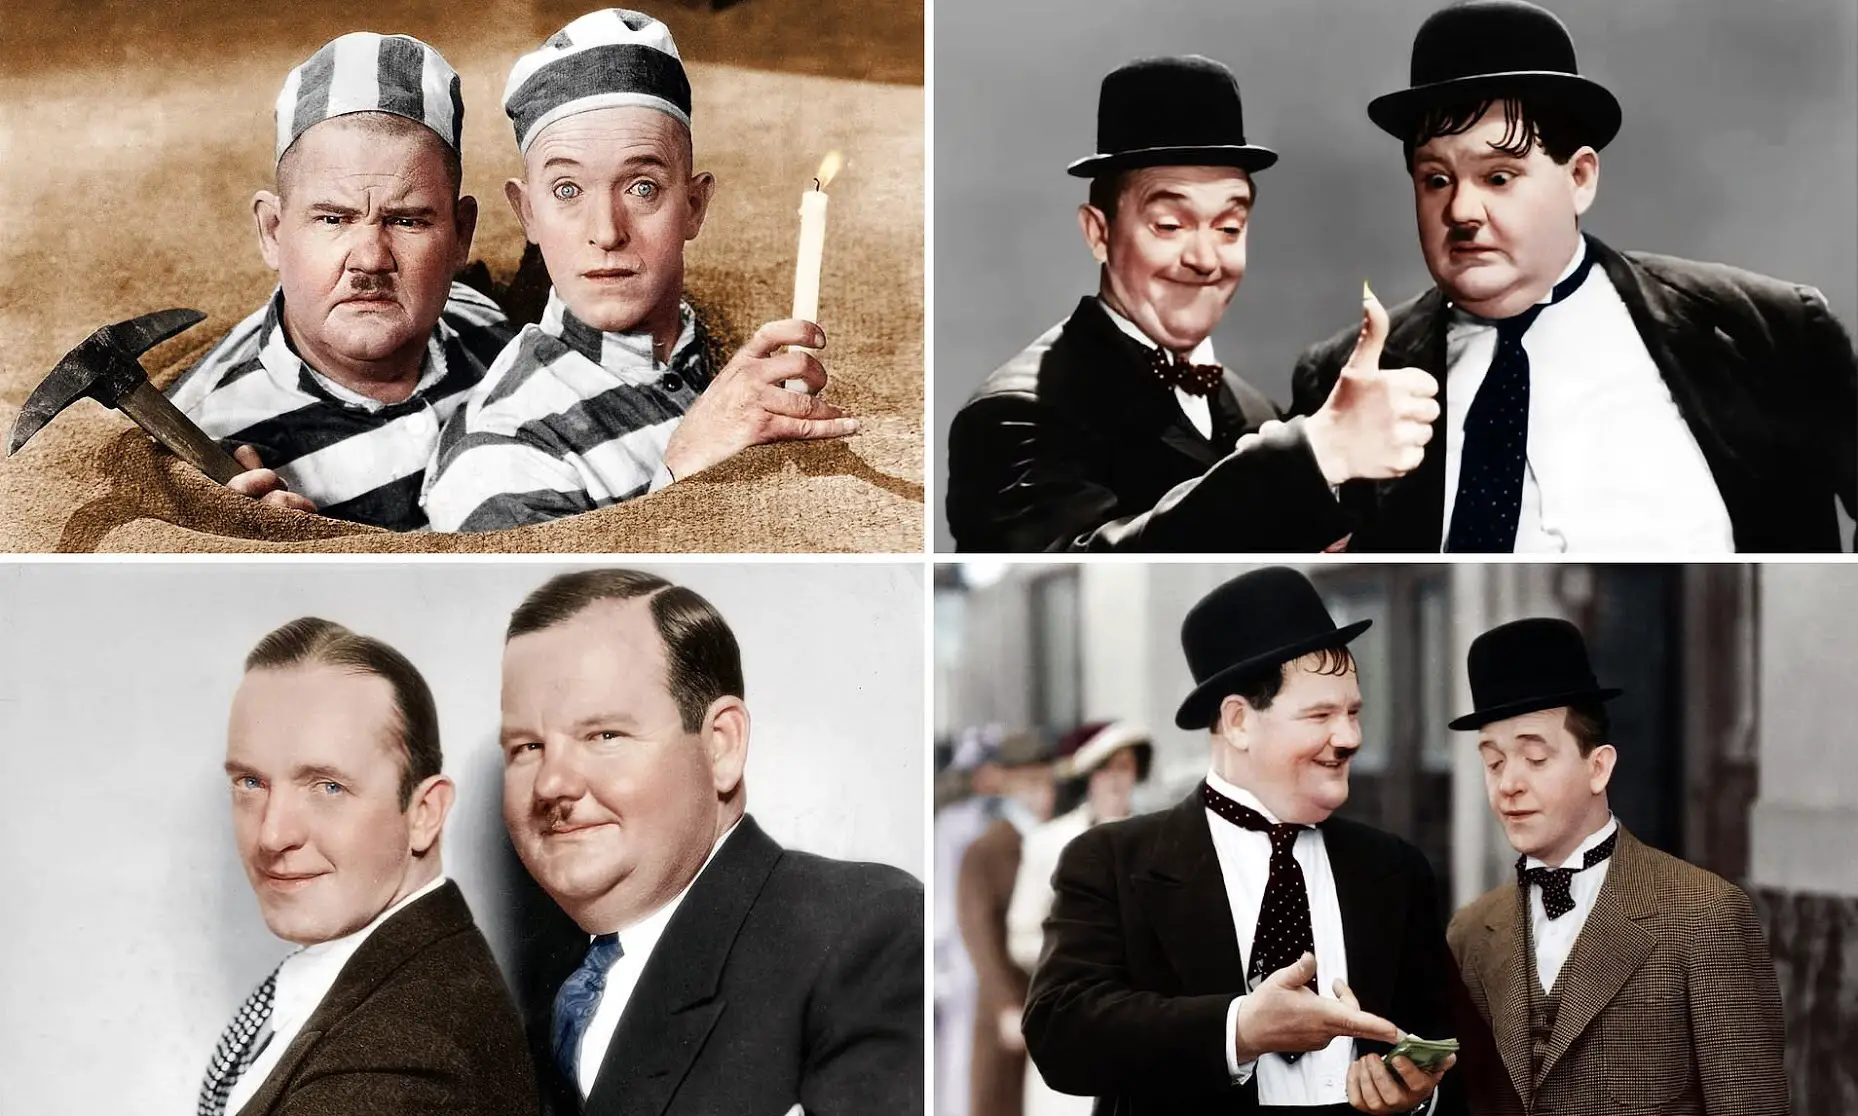 Photo of Stars of black and white film Laurel and Hardy are brought to life after images are them are colorized ahead of new biopic film